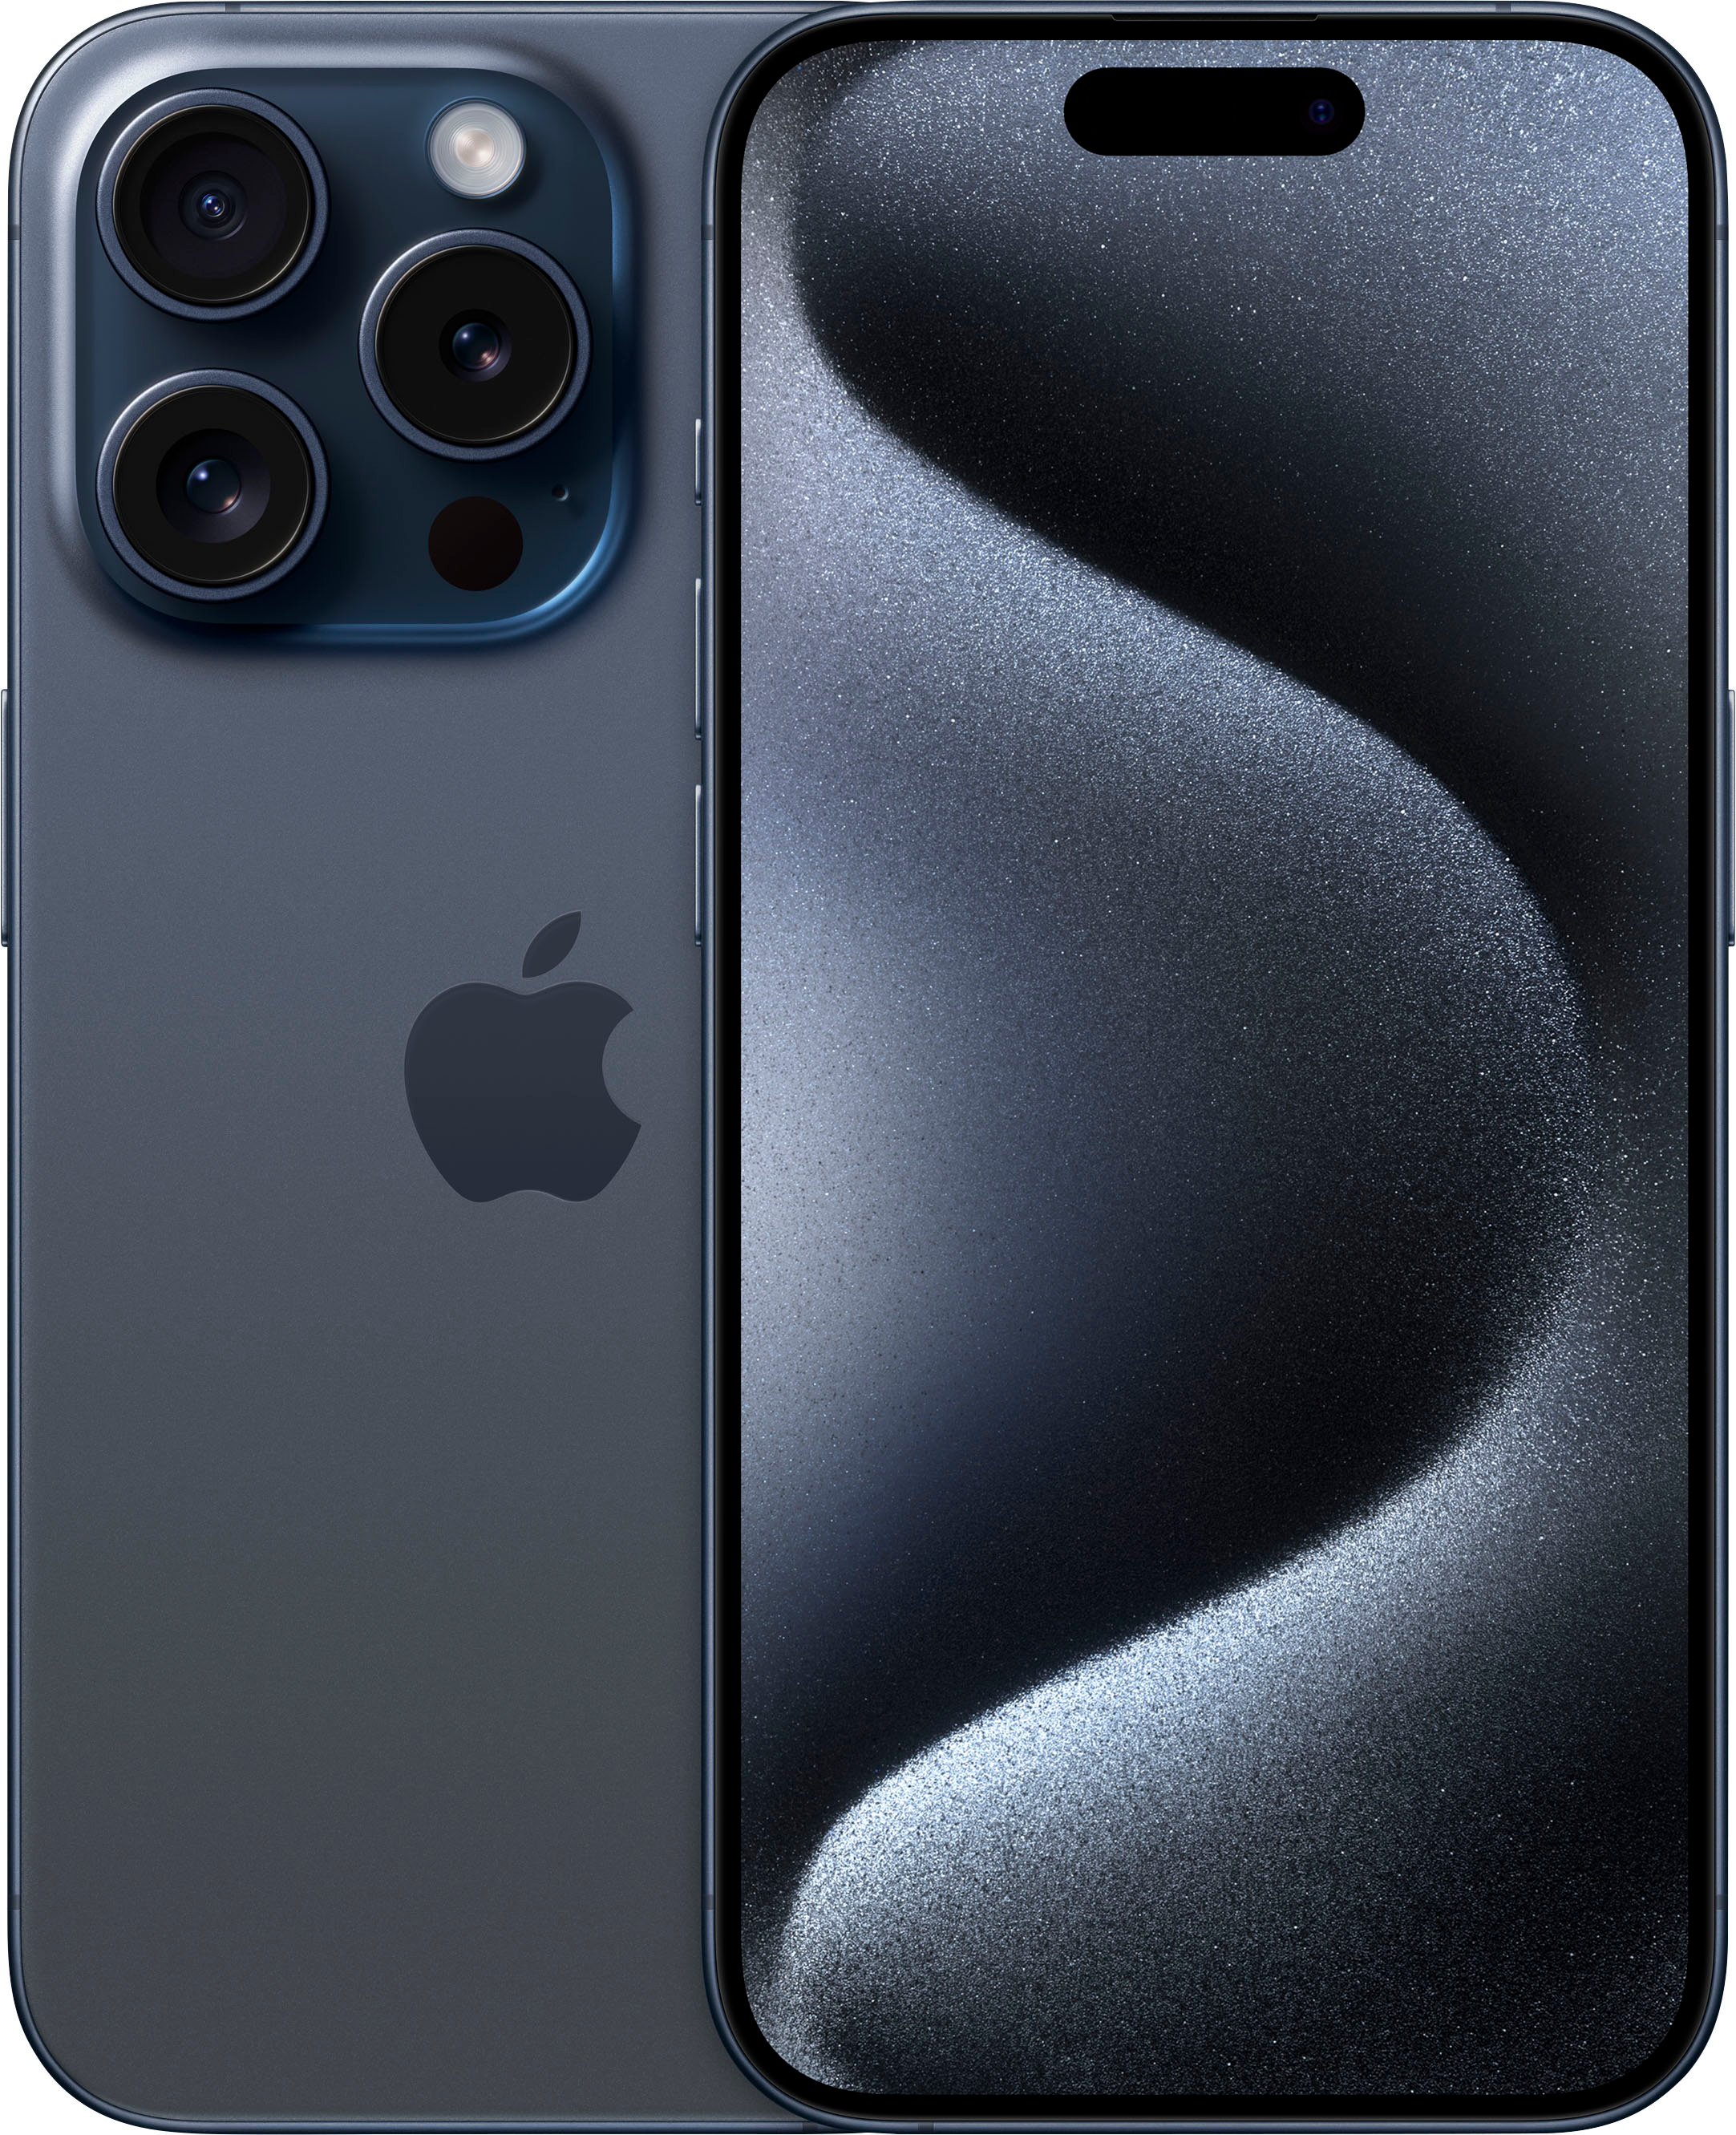 iPhone 15 Pro: Should You Buy? Features, Reviews, Discounts, and More